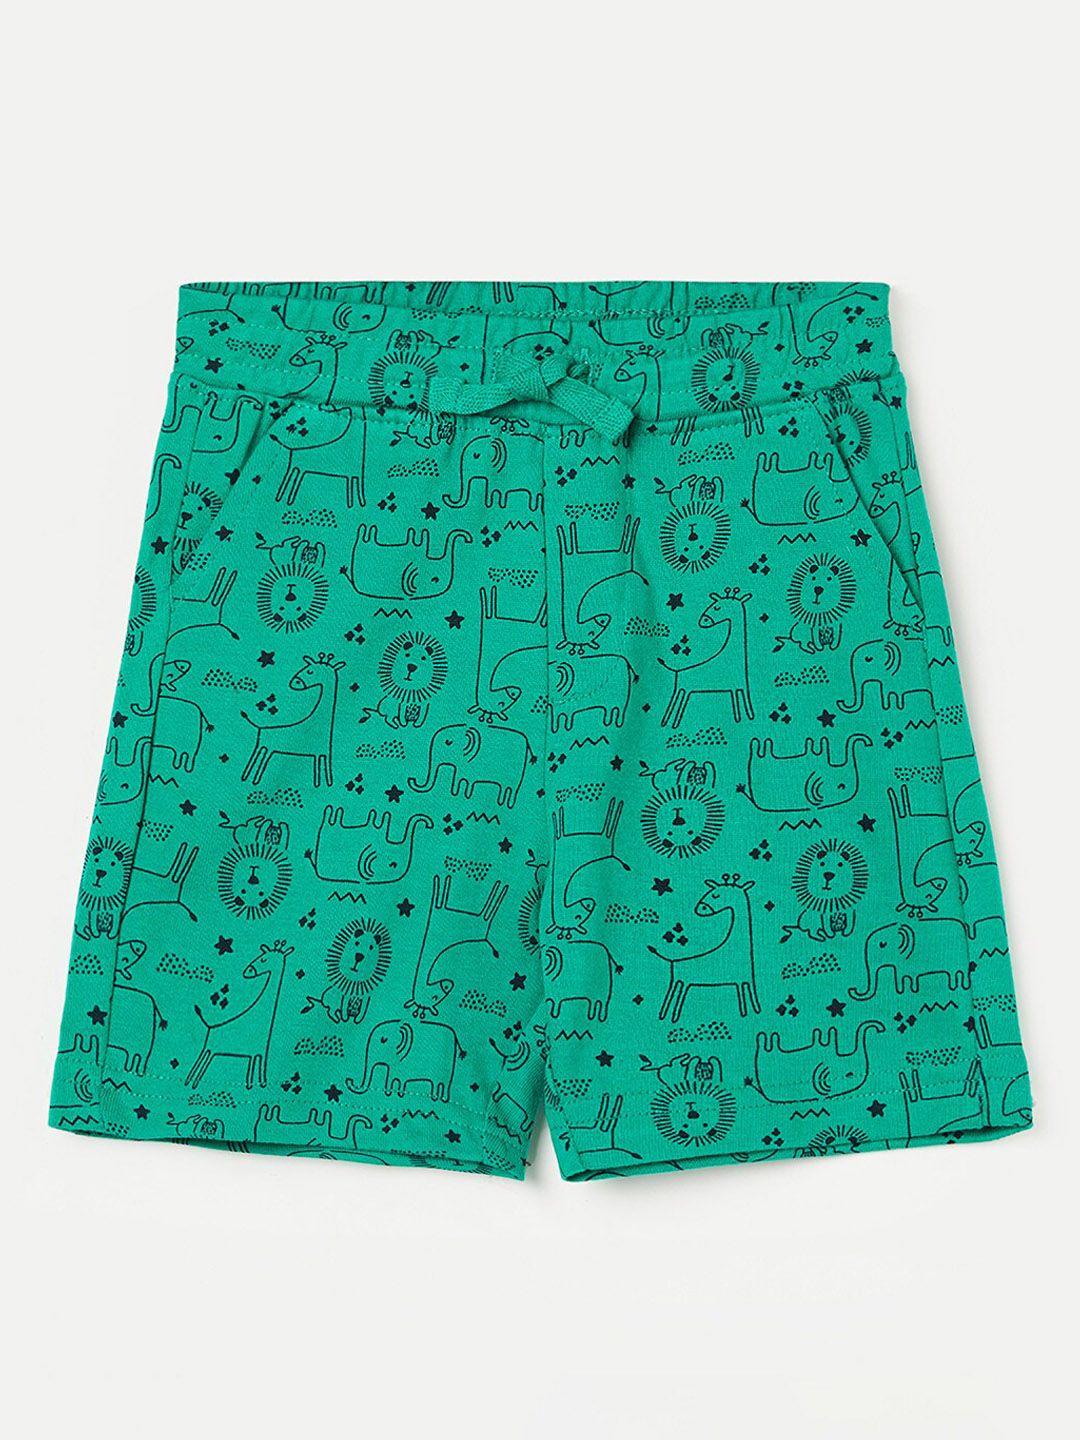 Juniors by Lifestyle Boys Conversational Printed Slim Fit Pure Cotton Shorts